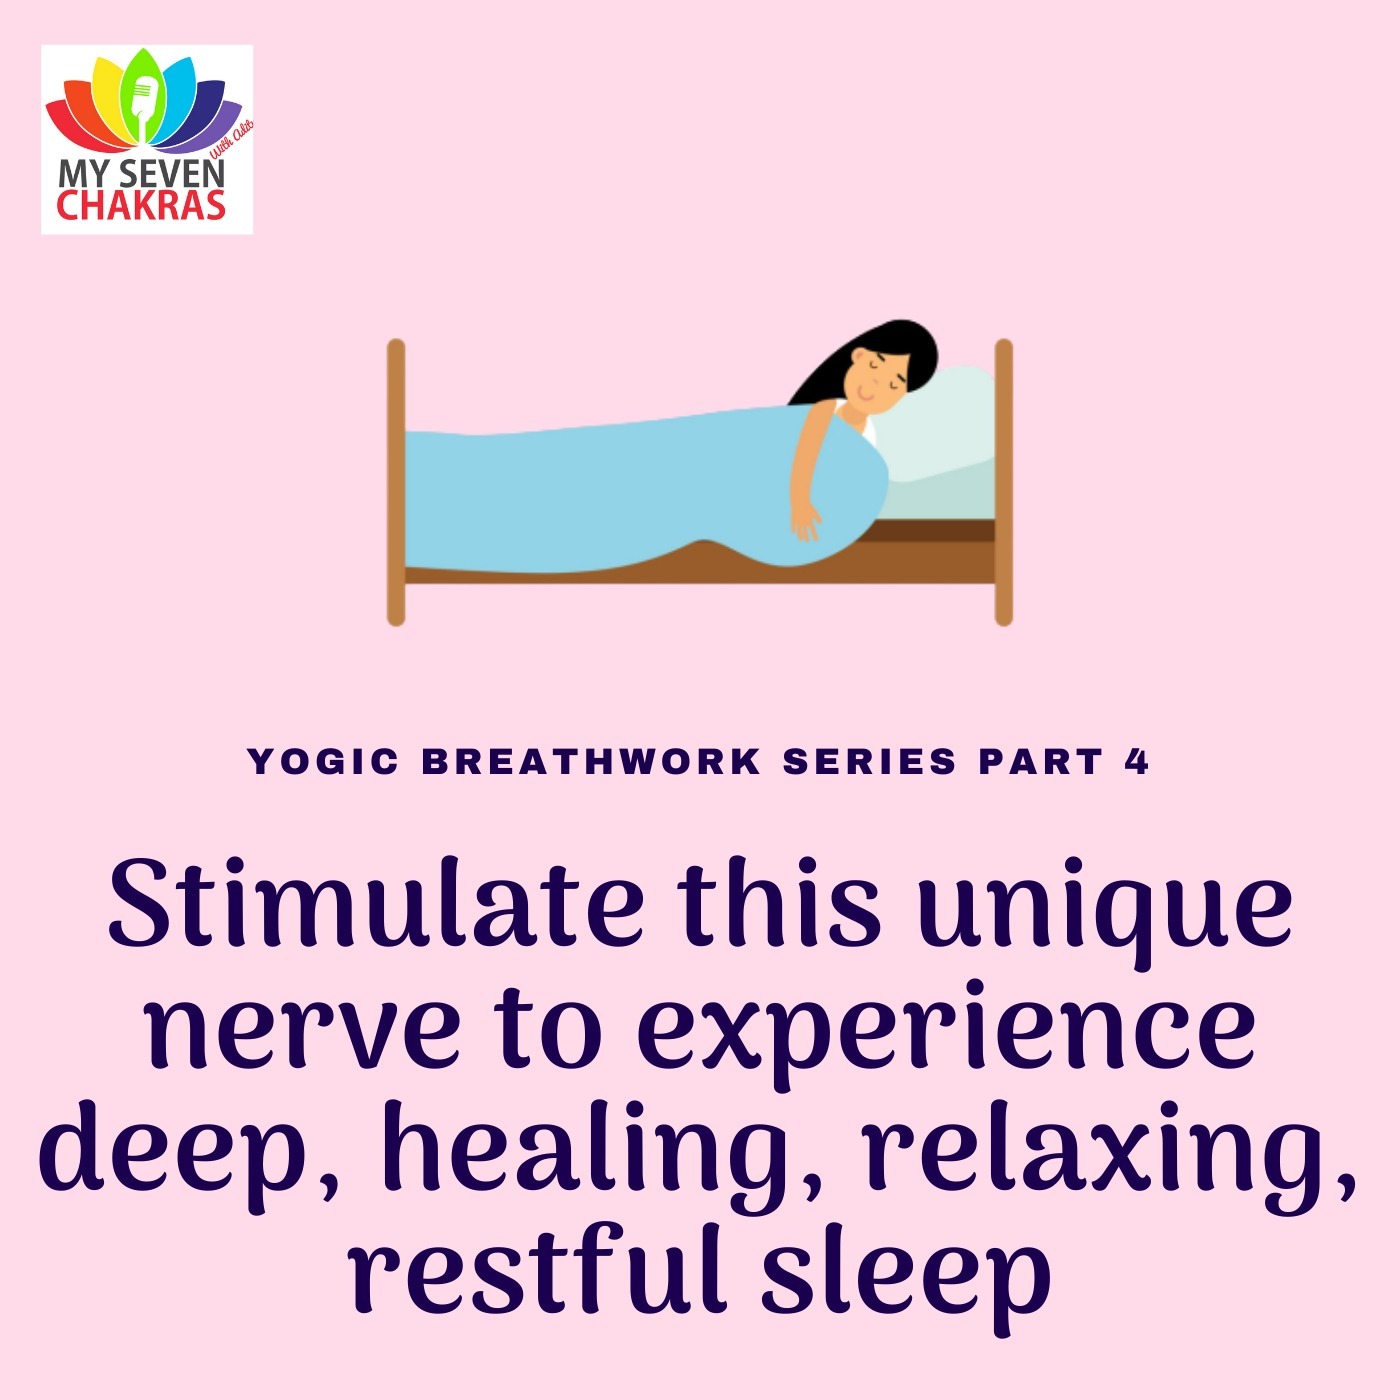 Stimulate This 'Unique Nerve' To Experience Deep, Healing, Relaxing And Restful Sleep